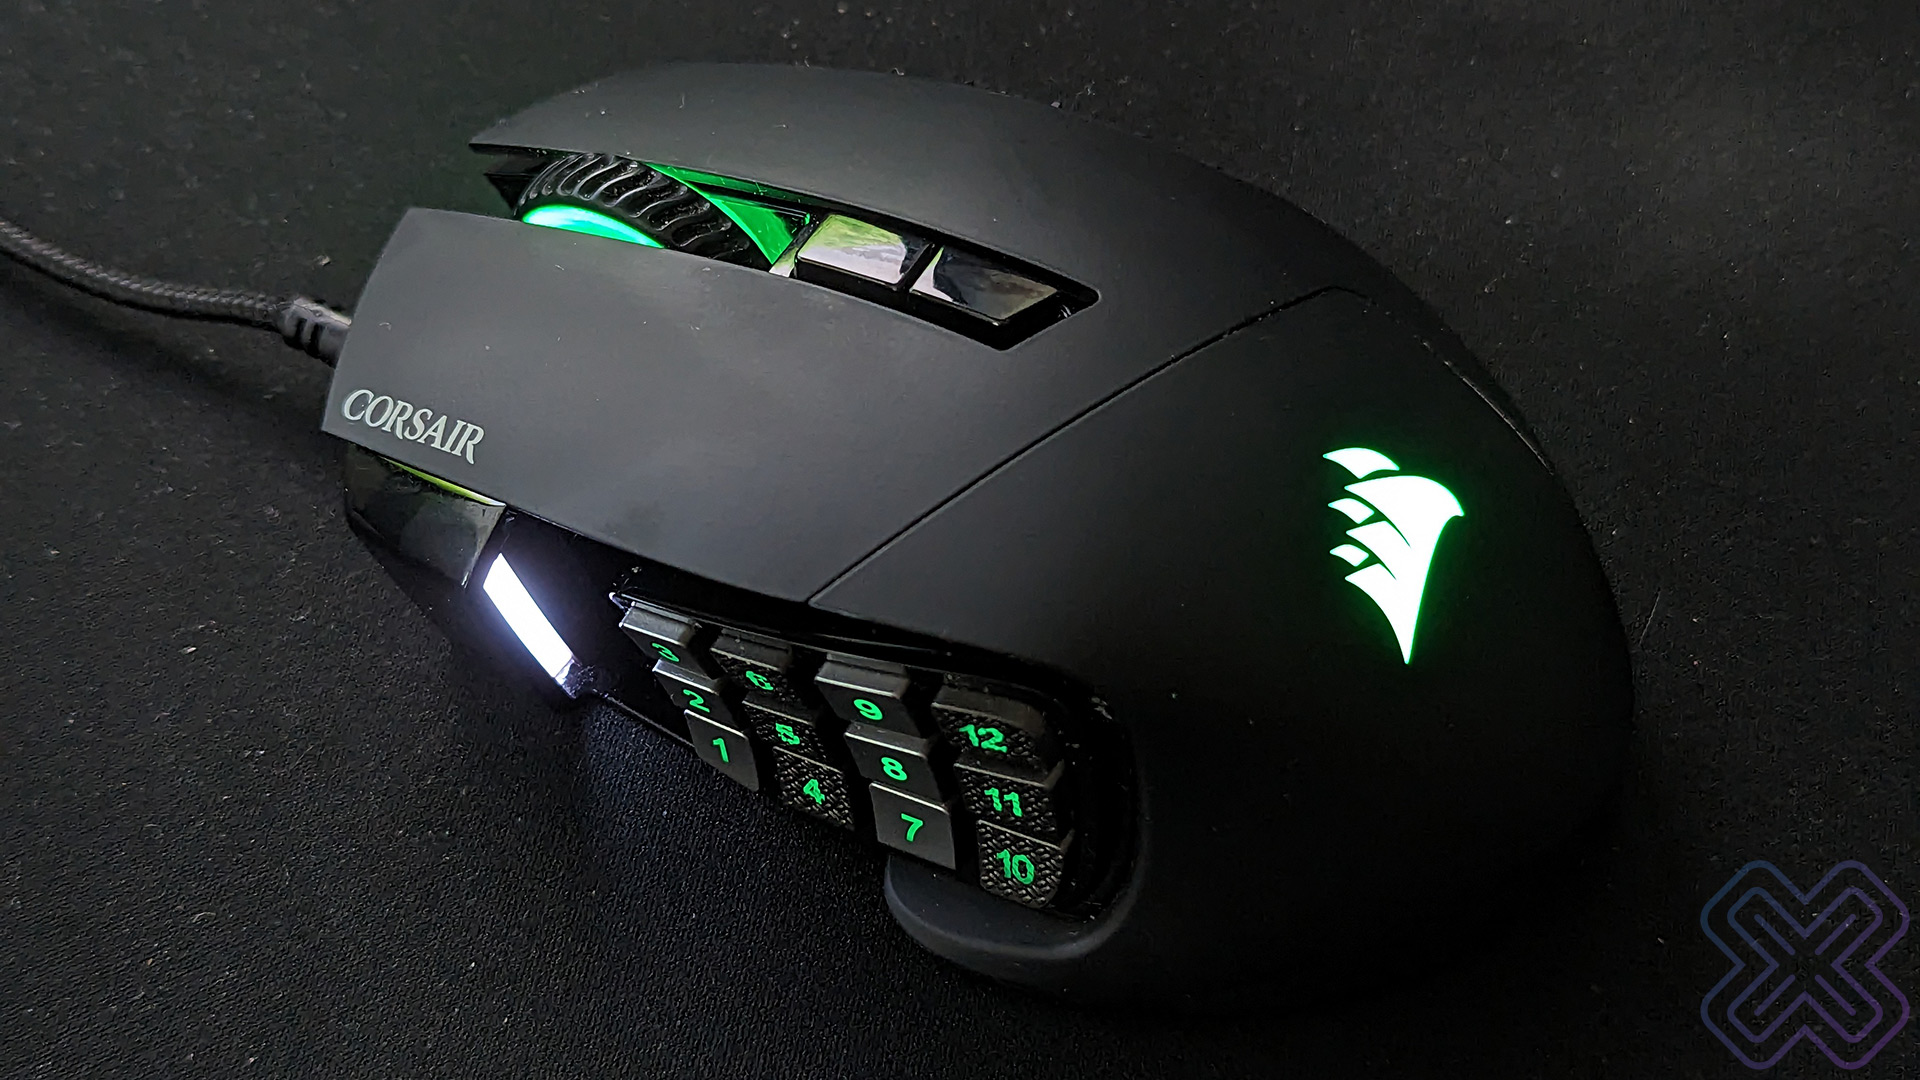 The Corsair Scimitar RGB Elite is my recommendation for an MMO gaming mouse